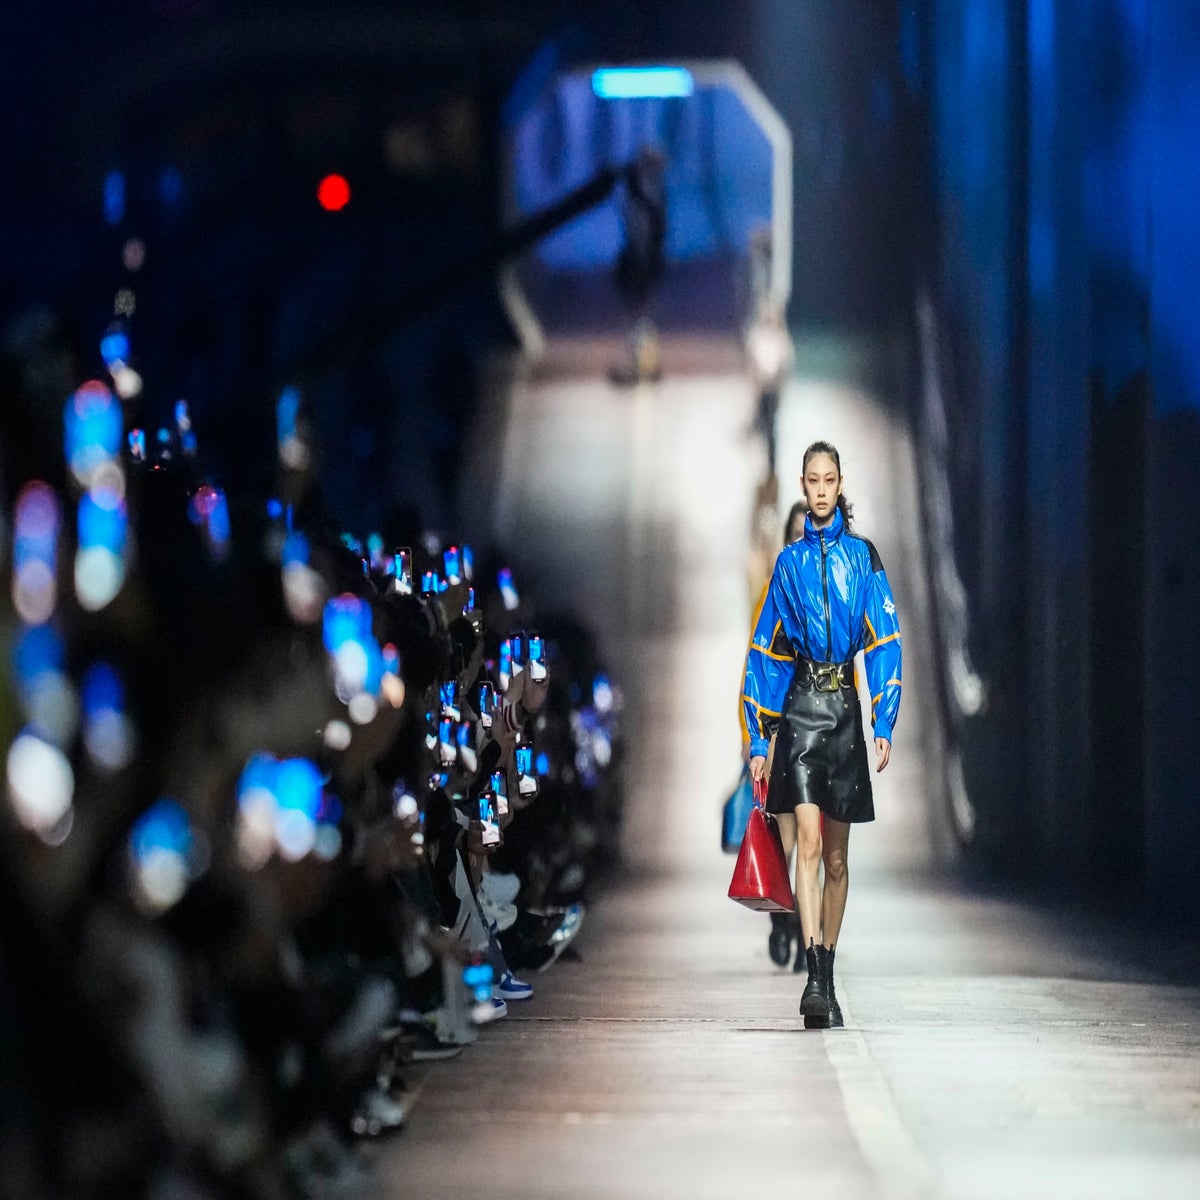 Louis Vuitton Bridges Cultures and Fashion With a Show in Seoul